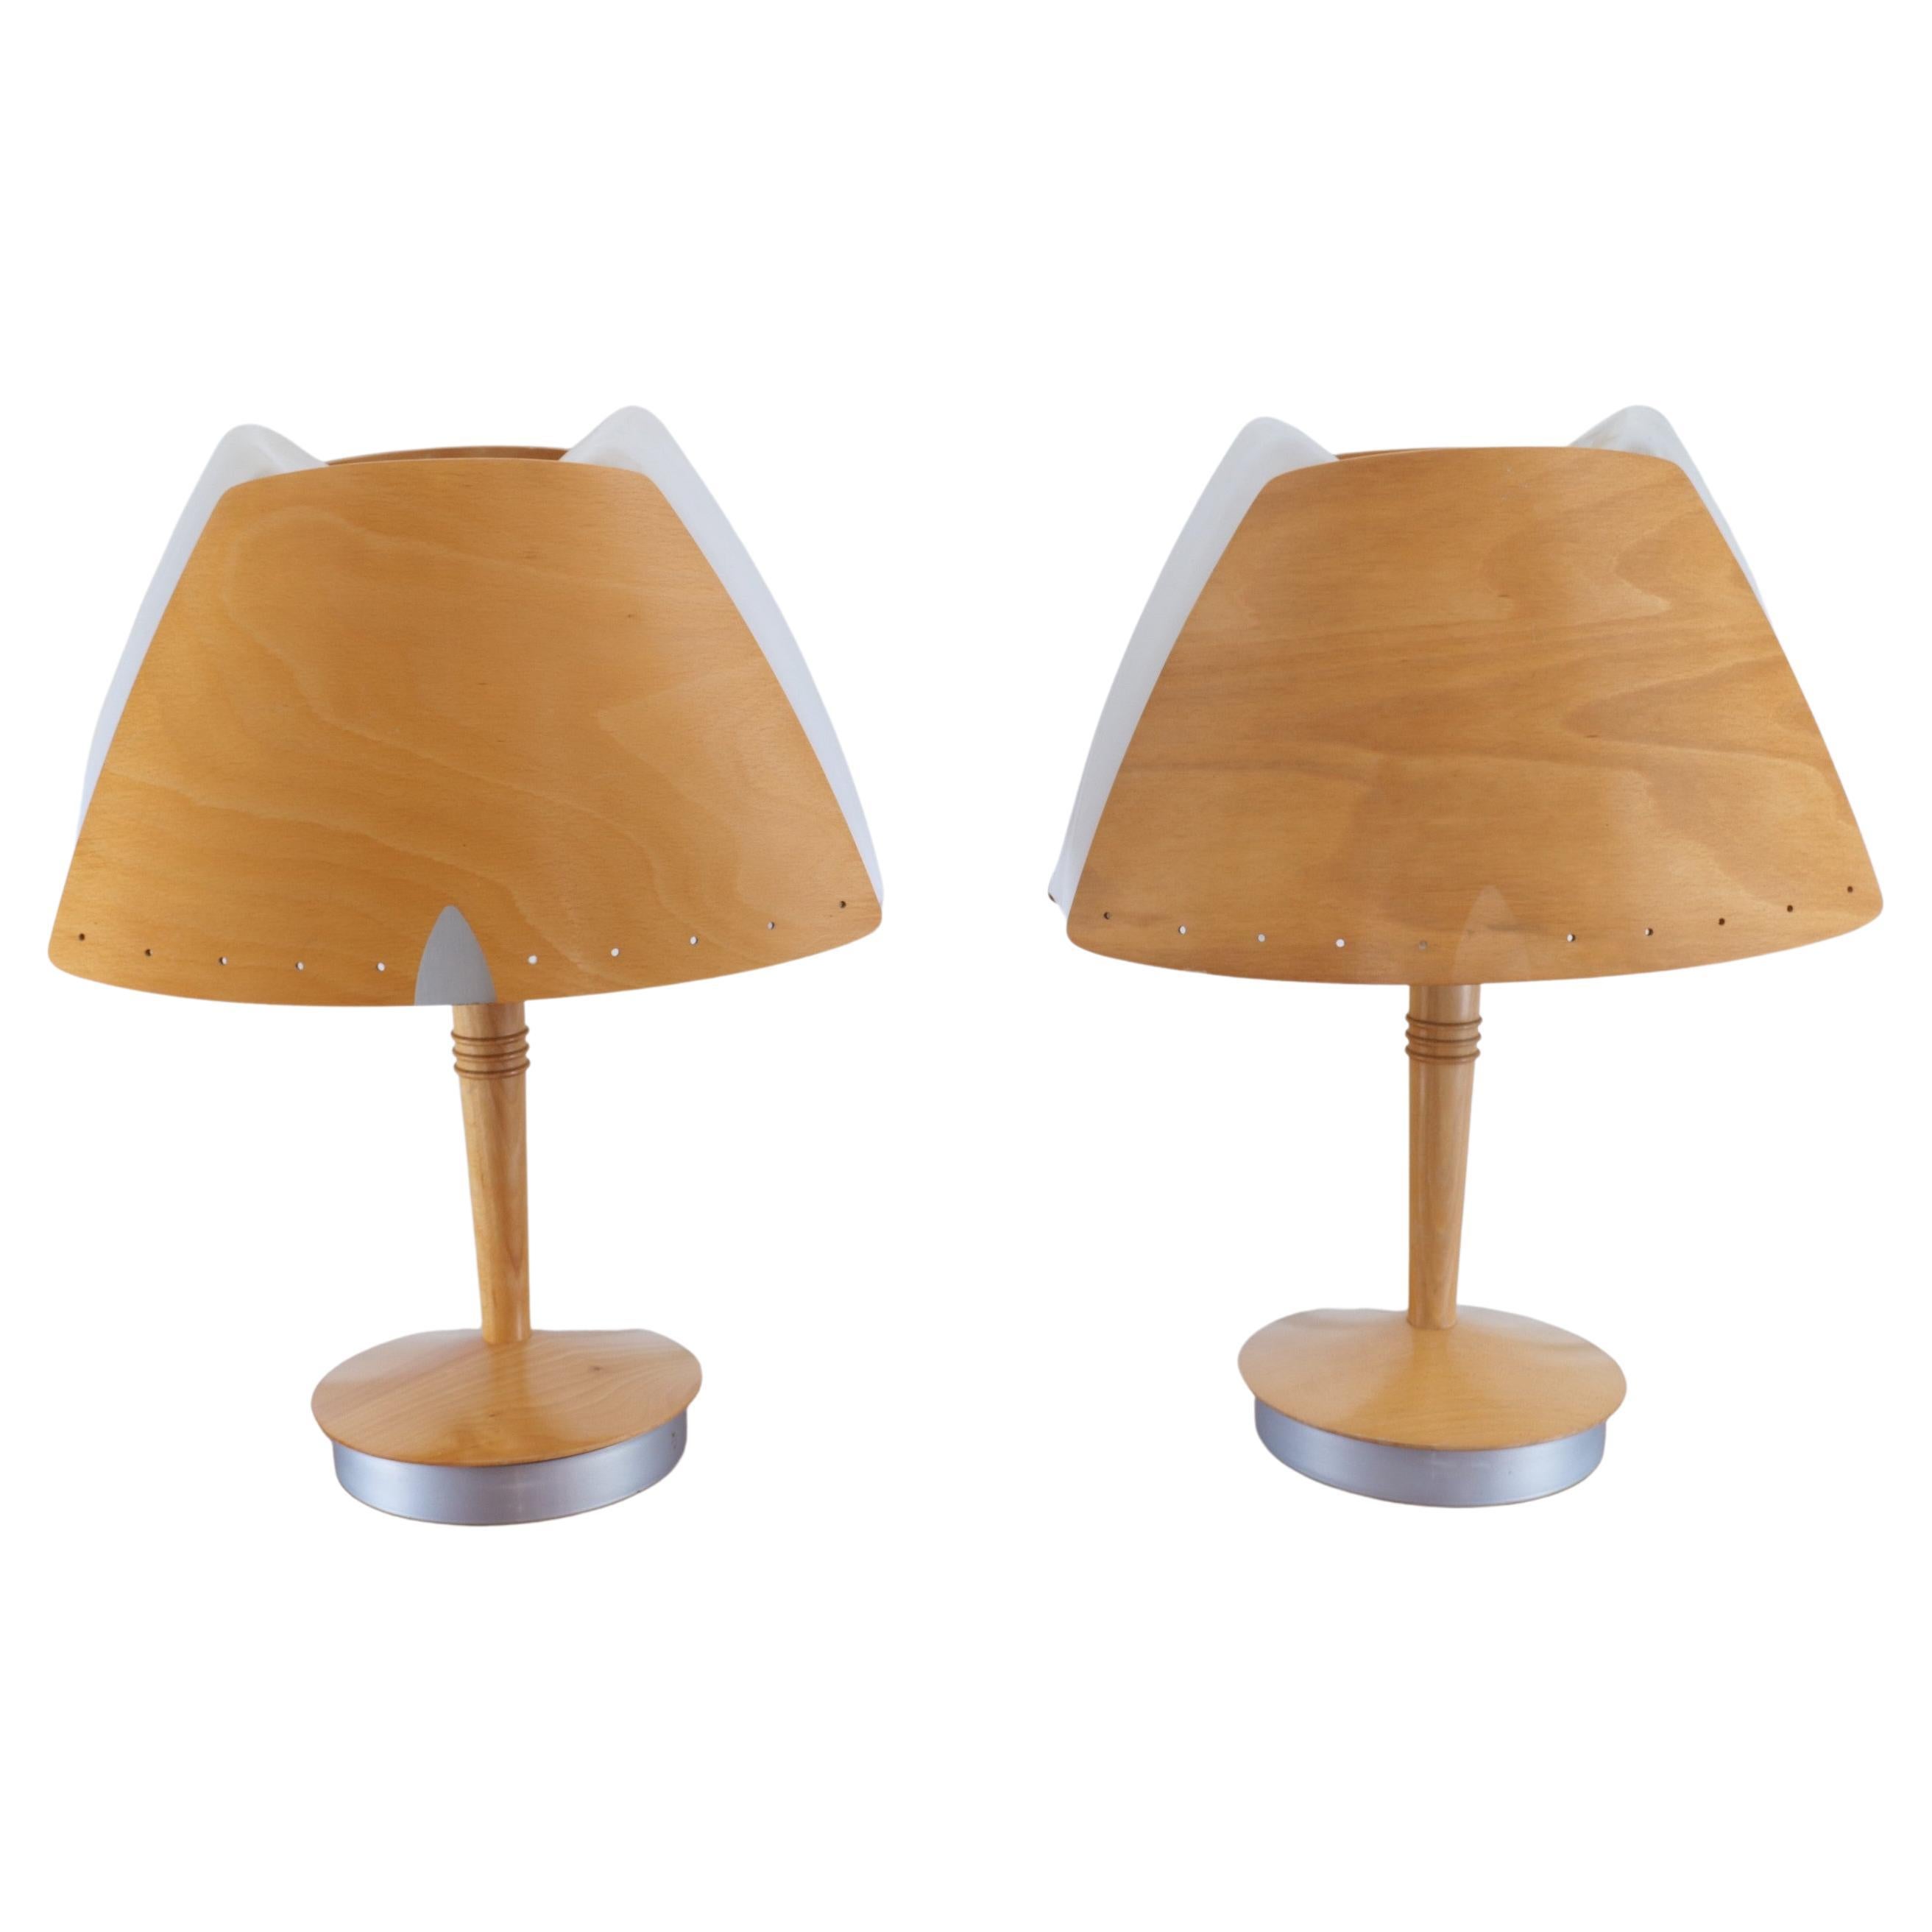 vintage french plywood lamps by Soren Eriksen for Lucid 1980s